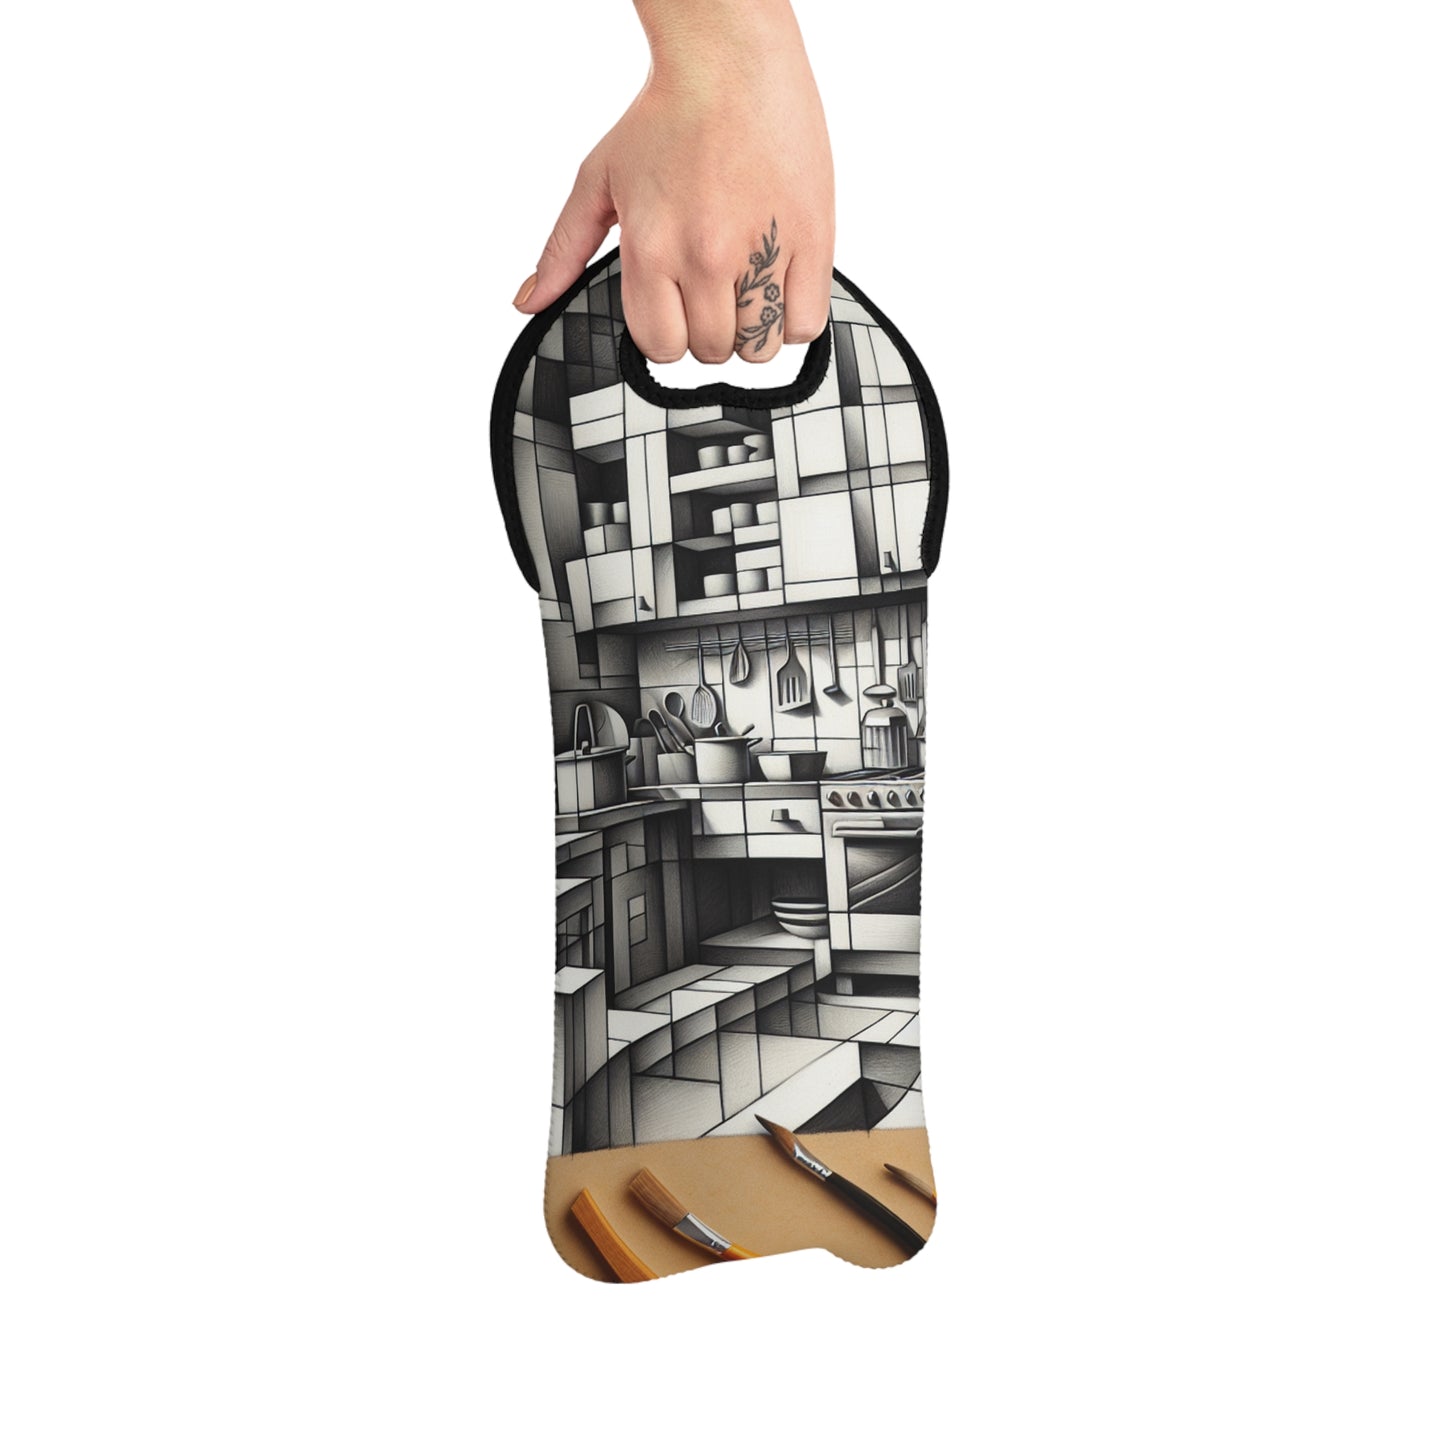 "Cubist Kitchen Collage" - The Alien Wine Tote Bag Cubism Style